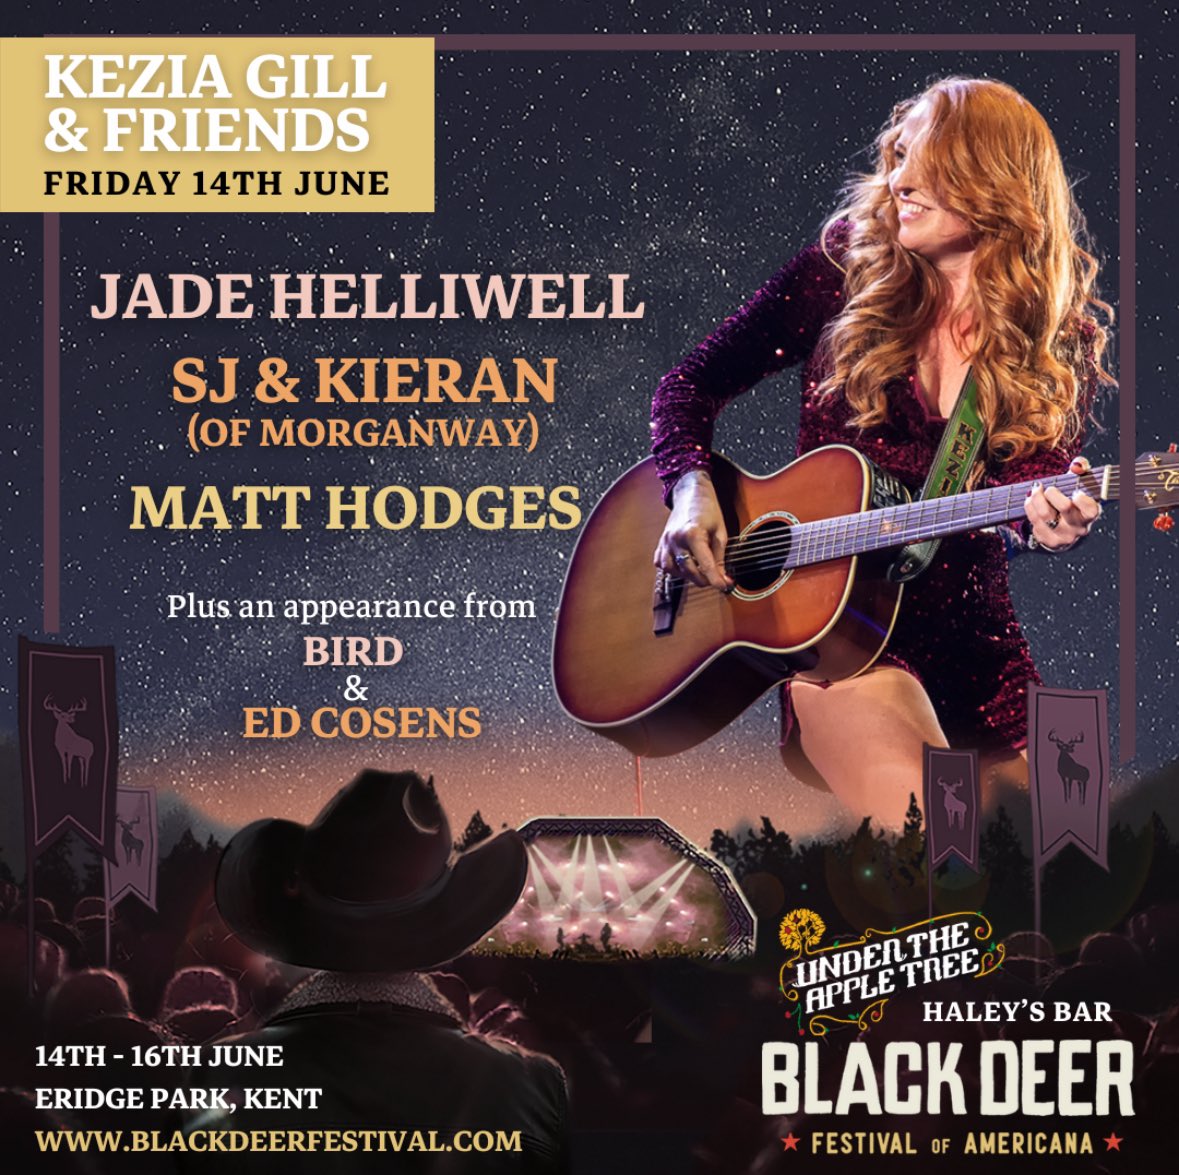 Special guests announced for the ‘Kezia Gill & Friends’ Show hosted by @utatlive & @WhisperingBob @blackdeerfest Joining me will be @jadehelliwell2 @mattghodges @SJ_Mortimer & Kieran Morgan (from @MorganwayUK ) and a grand finale performance featuring @edcosens & Bird 🇬🇧✨